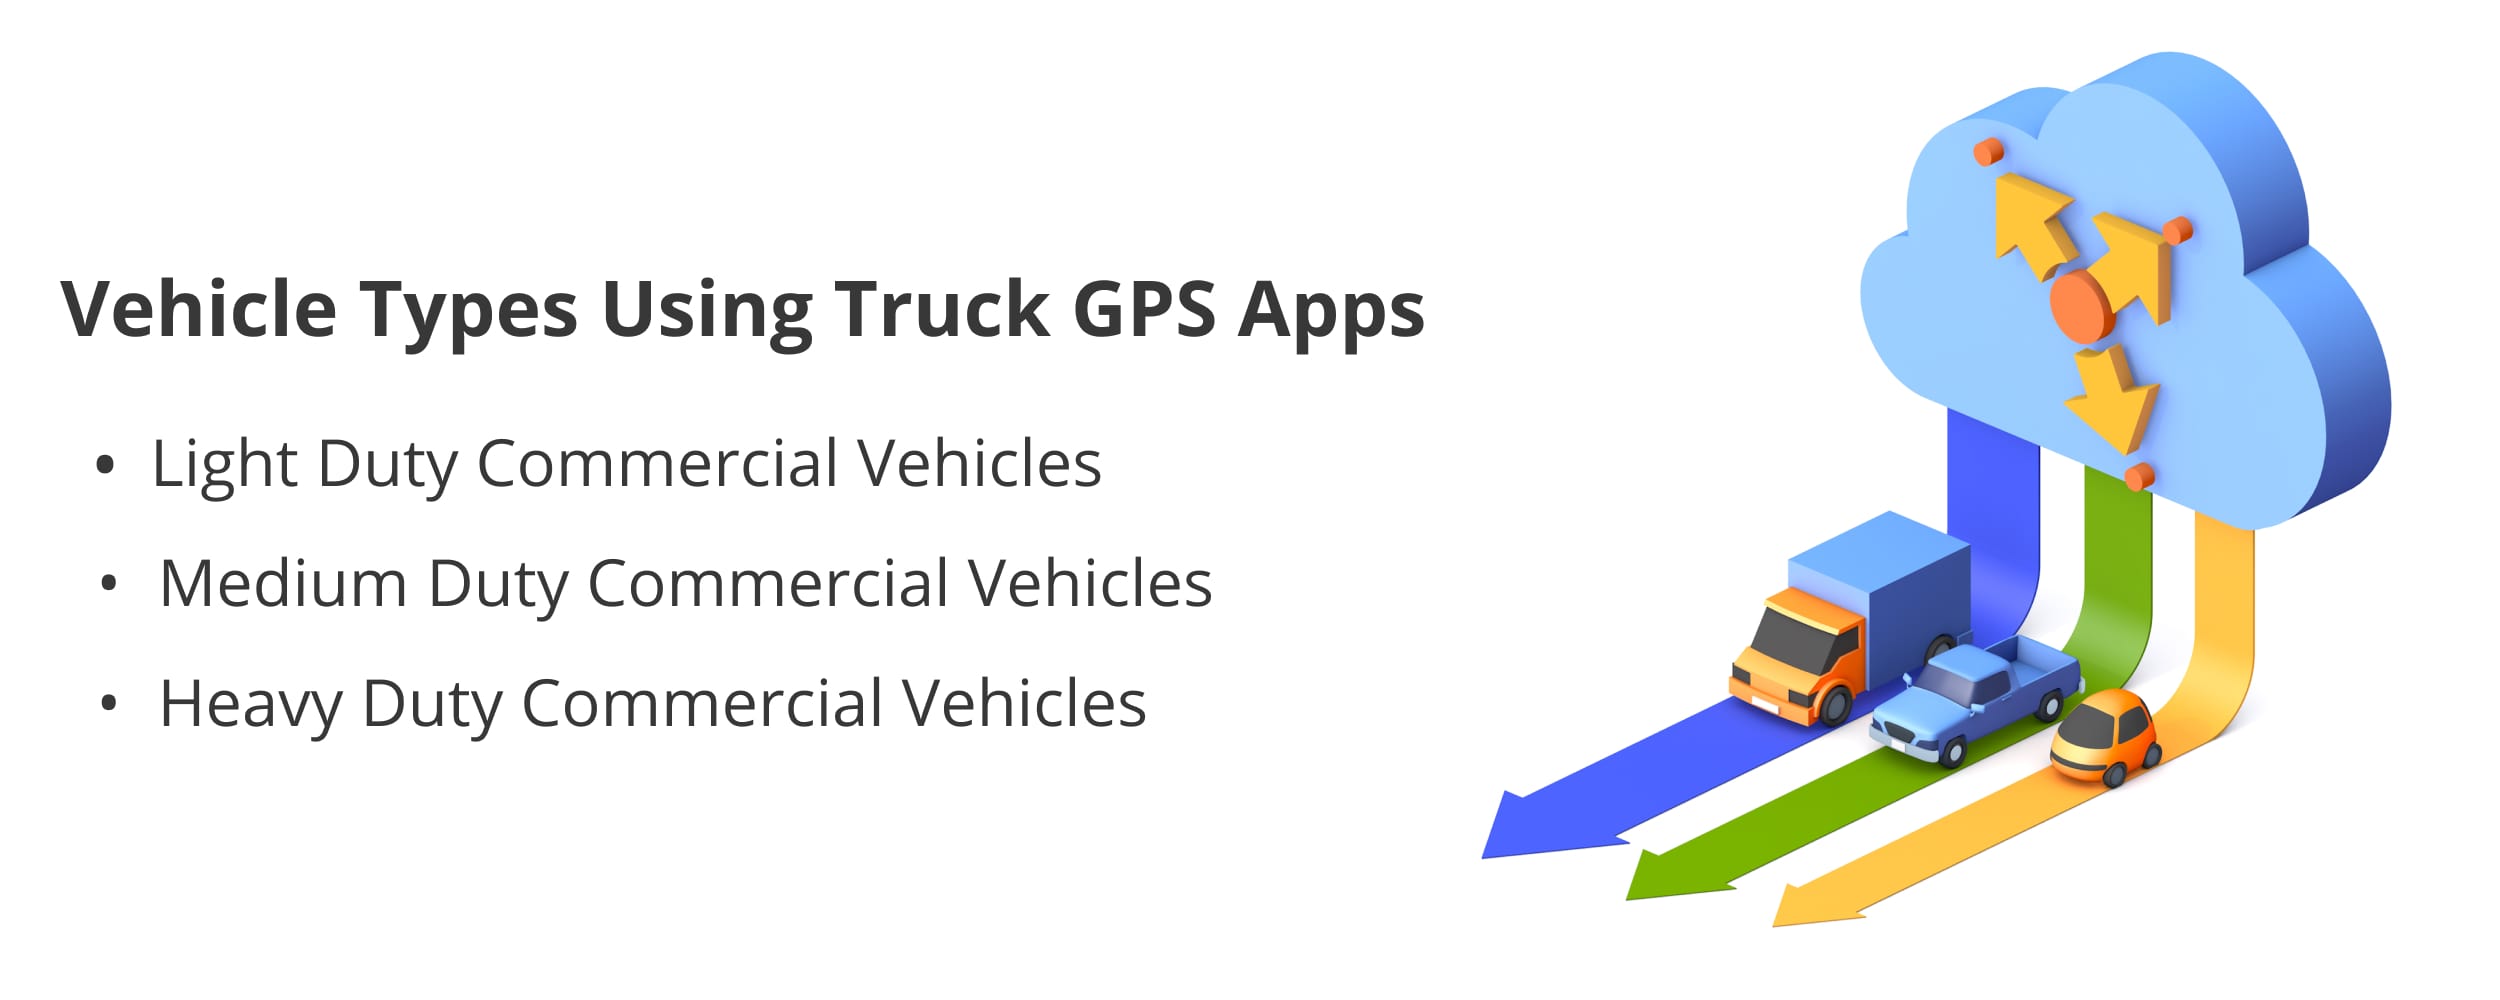 The truck types that should use GPS navigation apps created for commercial vehicles.